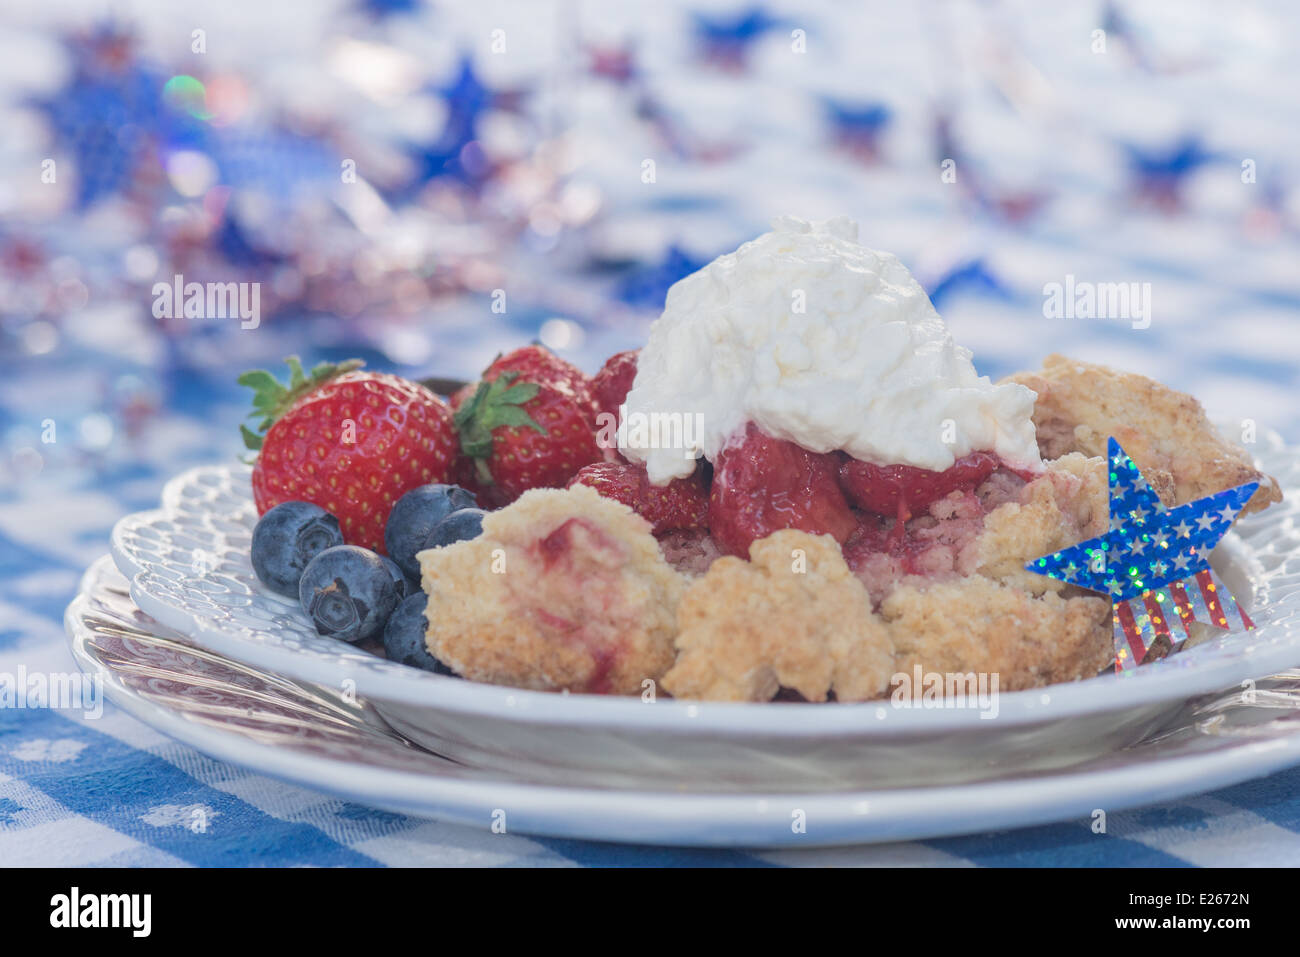 Fresh berry shortcake with stars and stripes Stock Photo